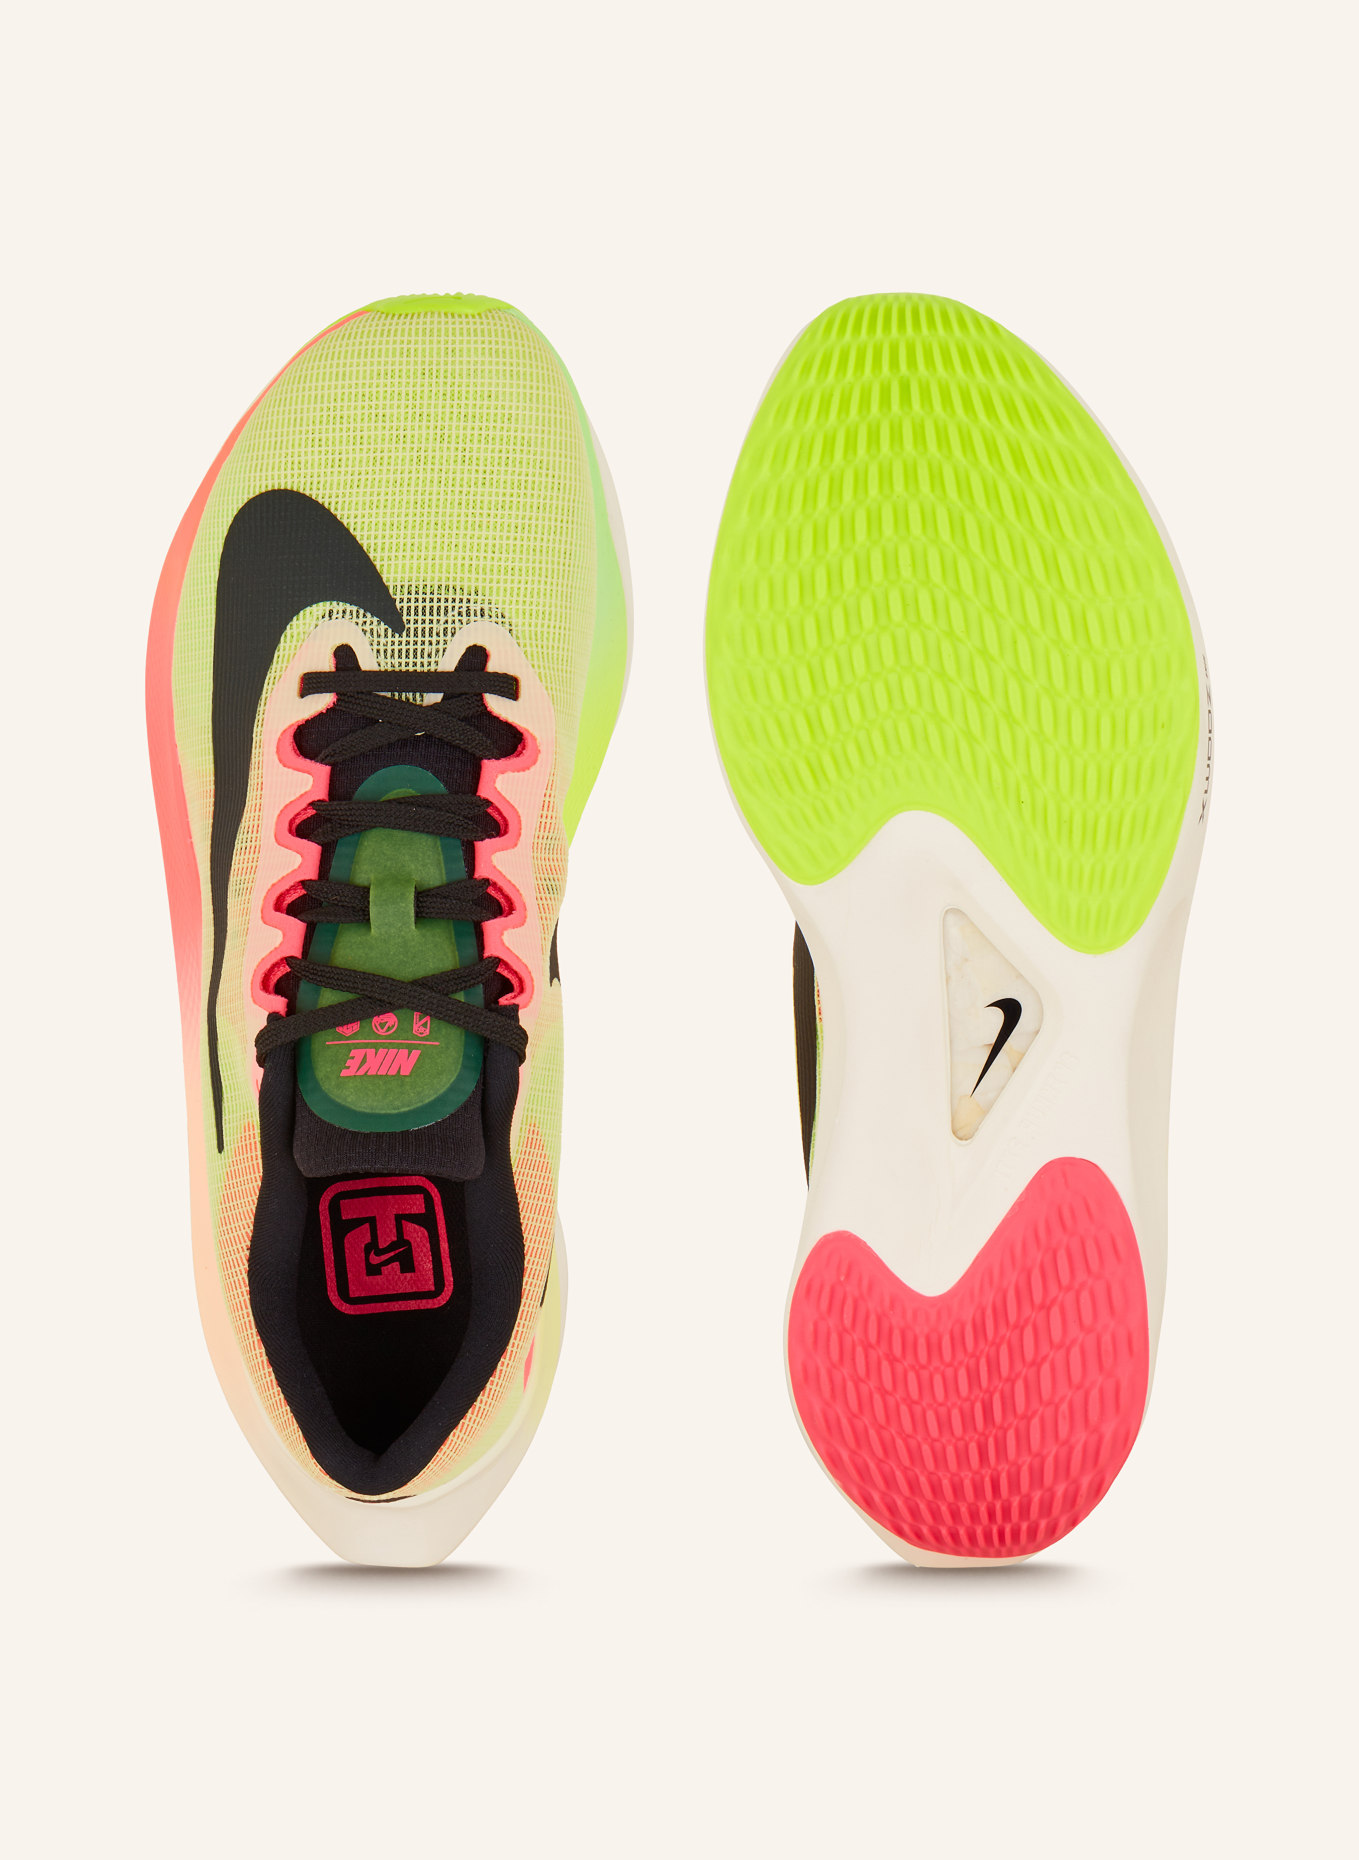 Nike Running shoes ZOOM FLY 5 PREMIUM, Color: NEON YELLOW/ NEON PINK/ BLACK (Image 5)